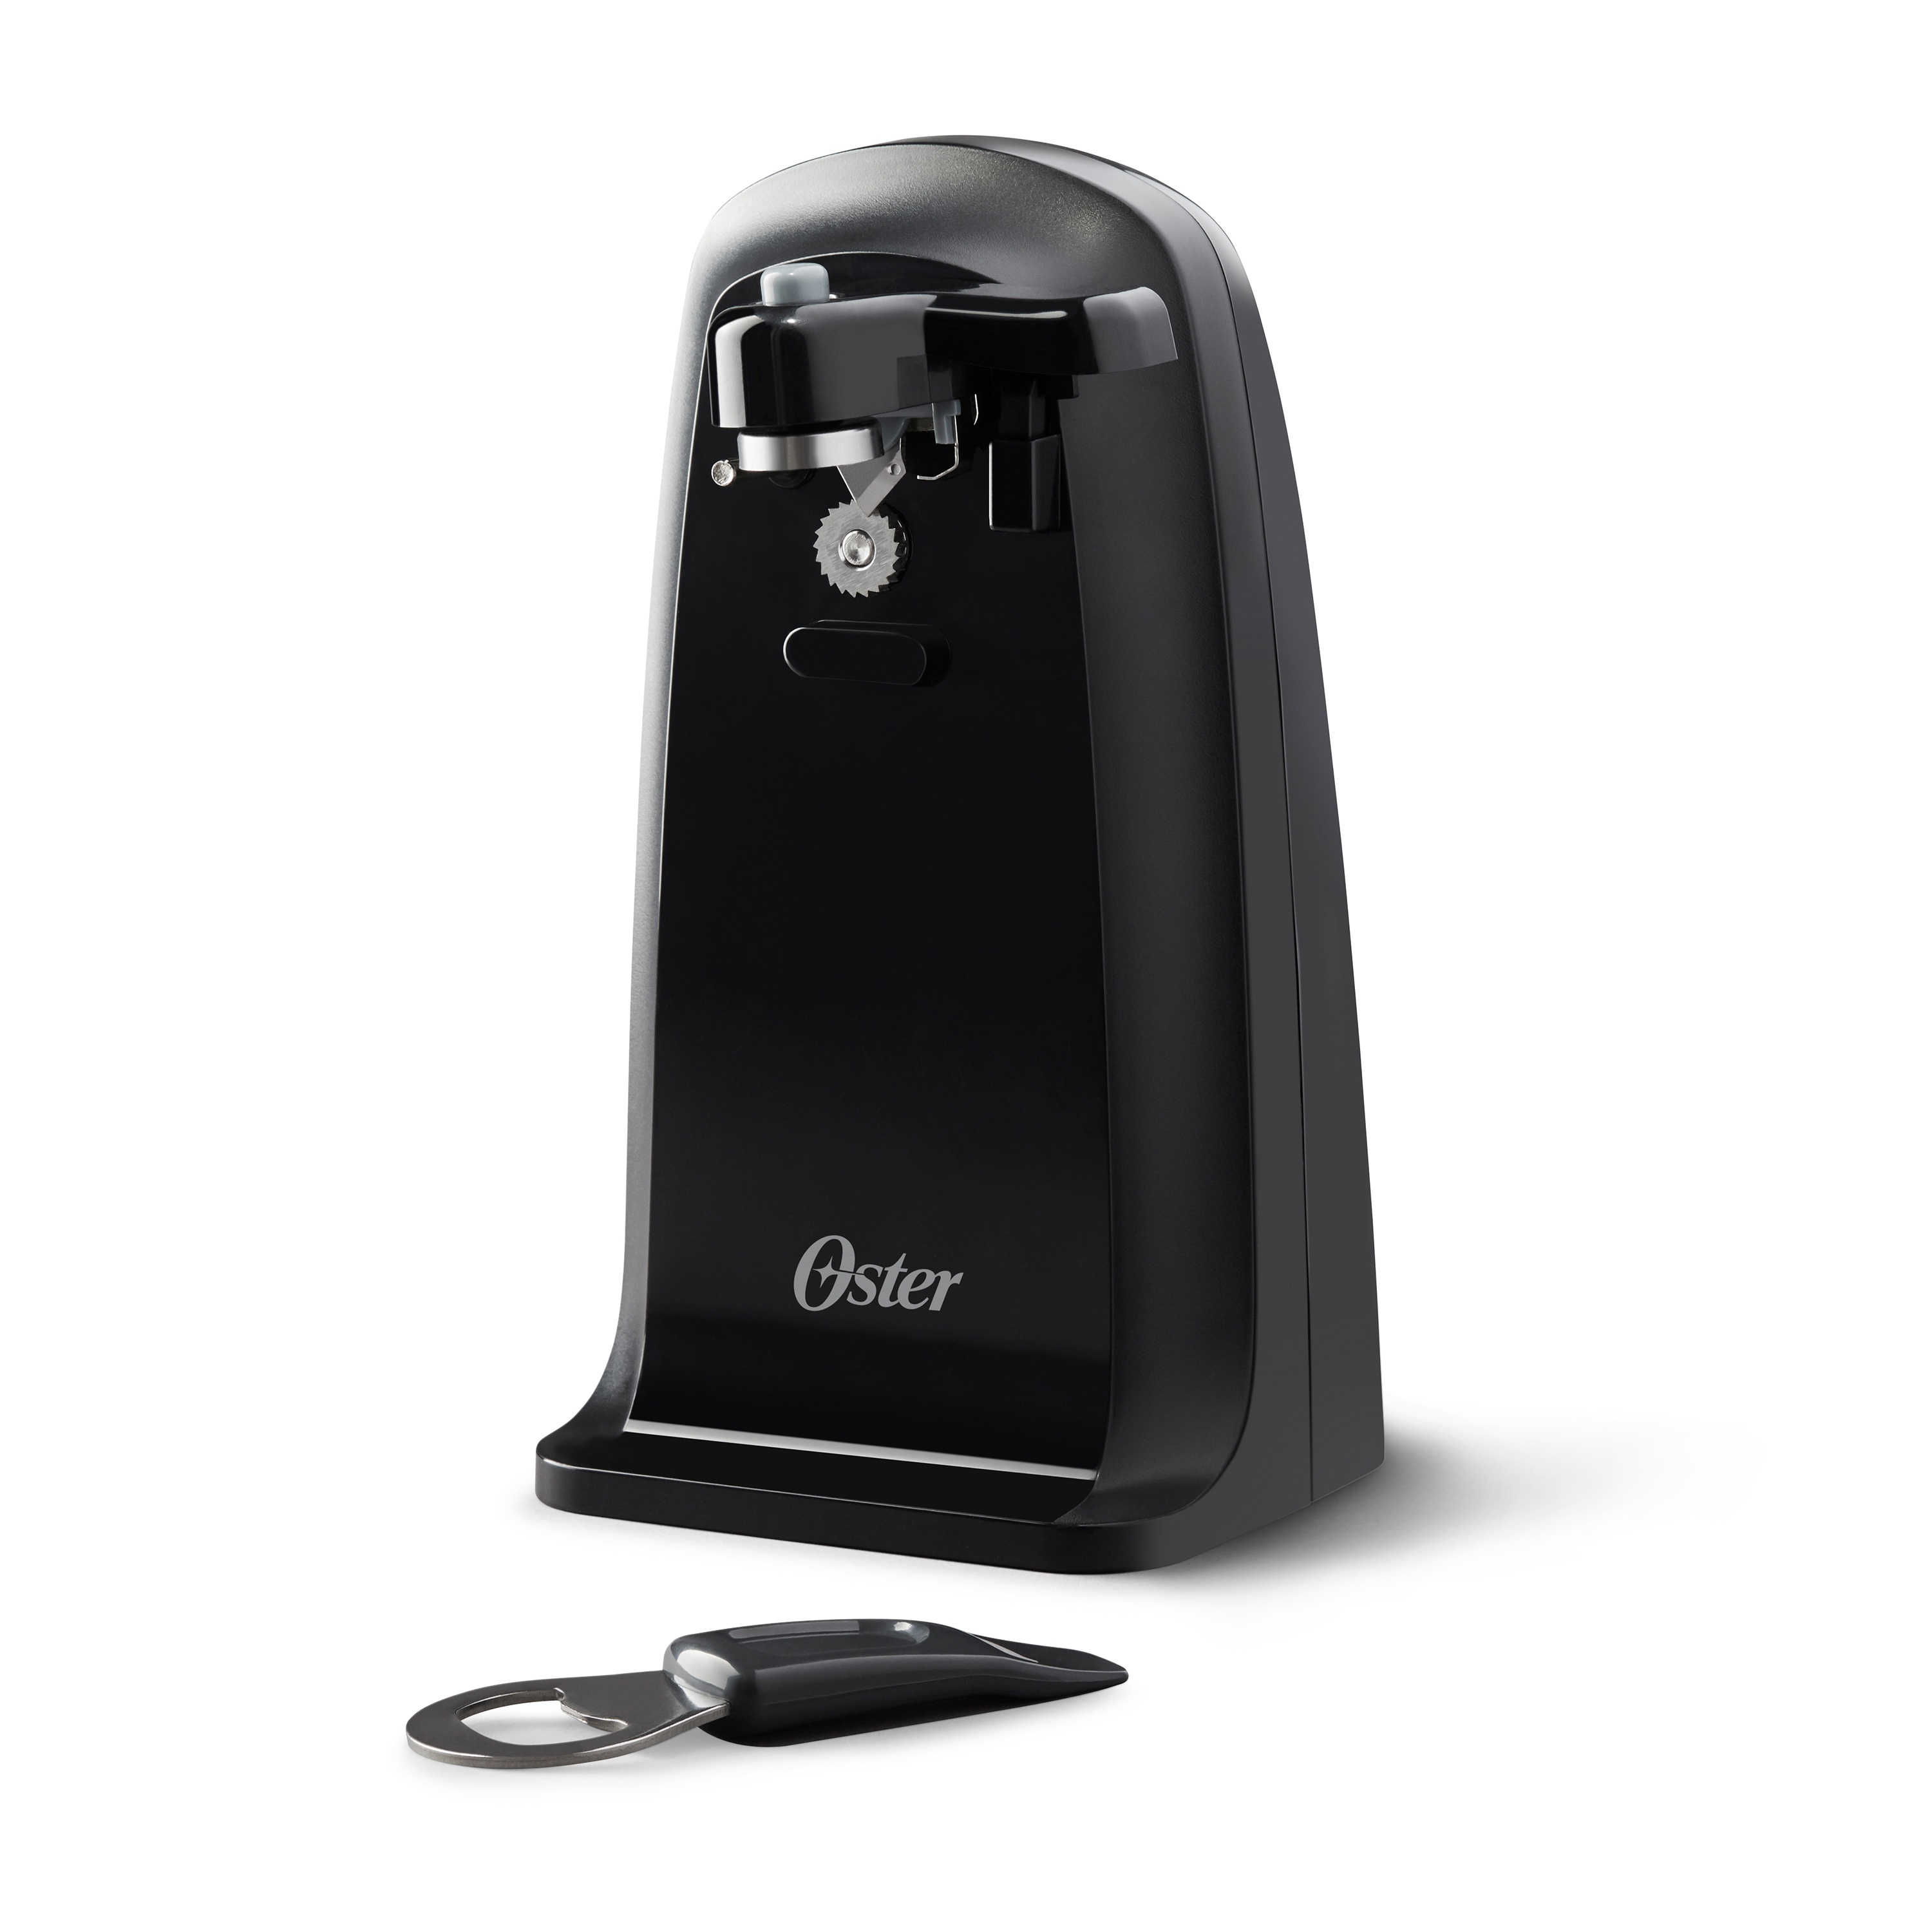 Oster Electric Can Opener with Power Pierce Cutting Blade for Precise Edges, Black - image 1 of 7